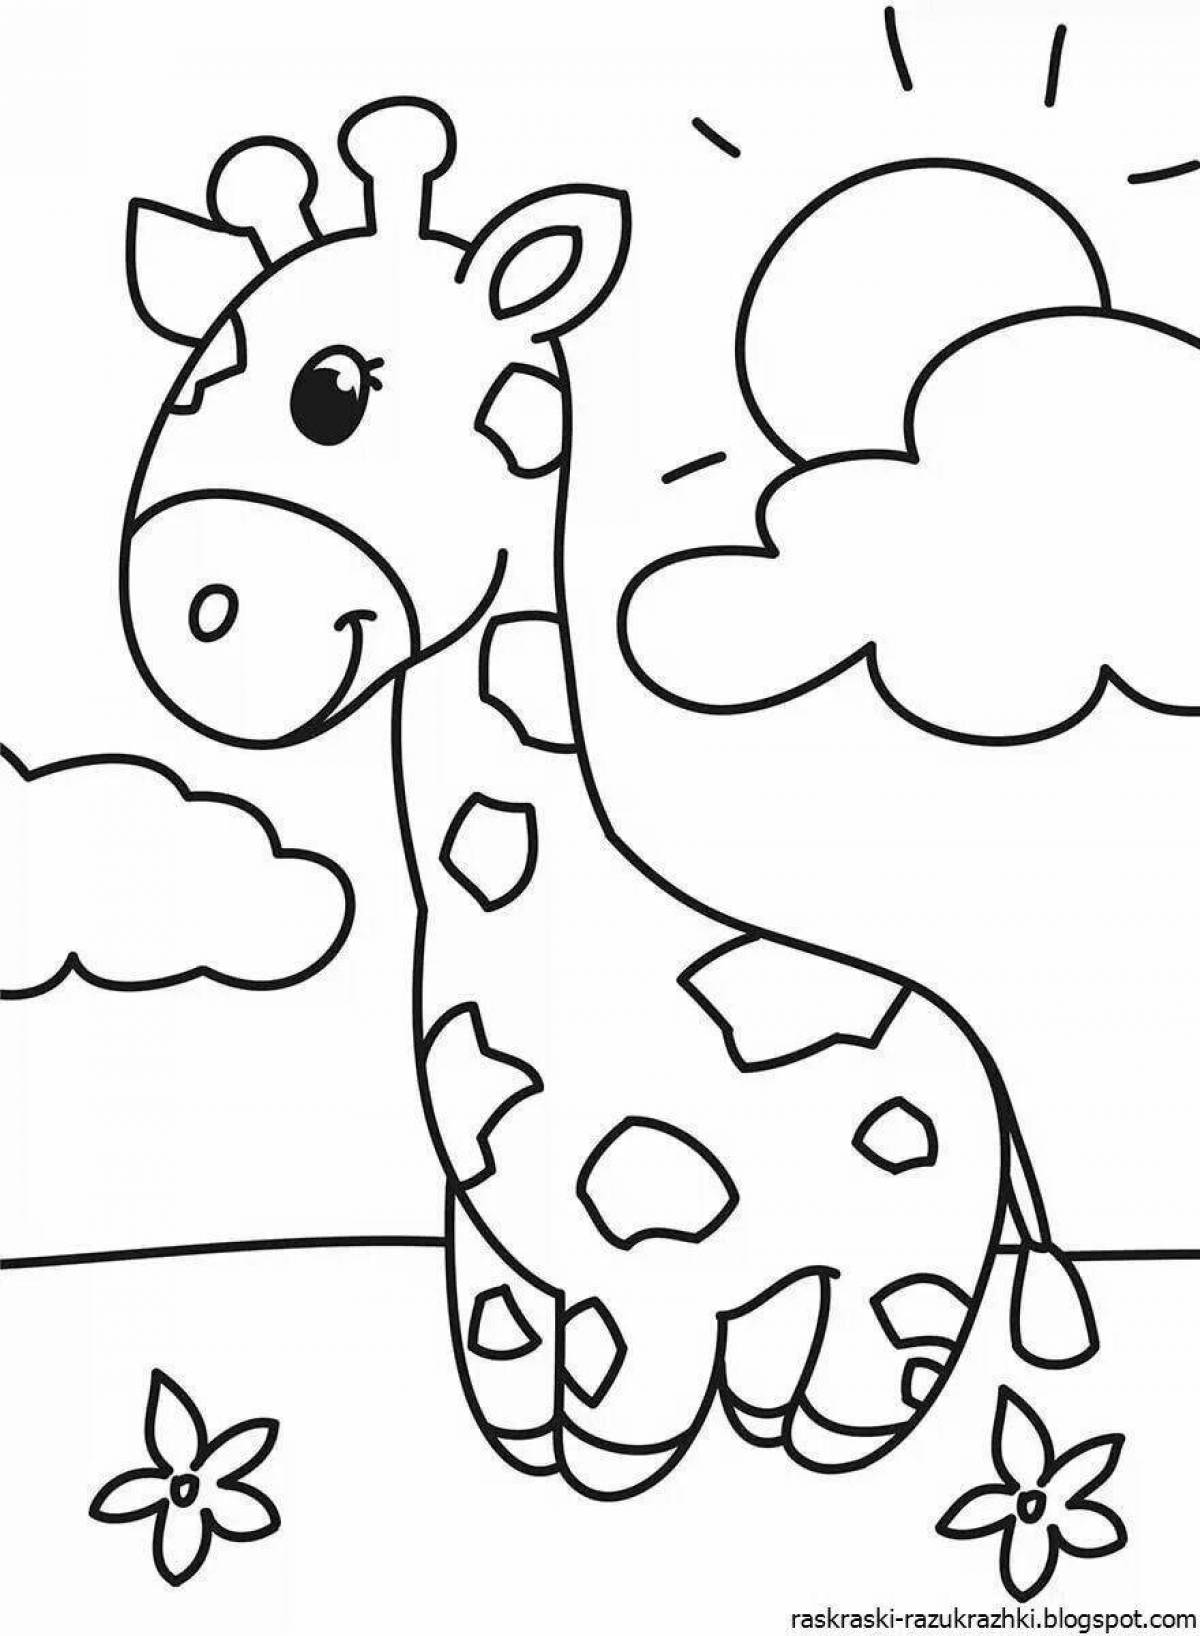 Creative coloring book for 4-5 year olds